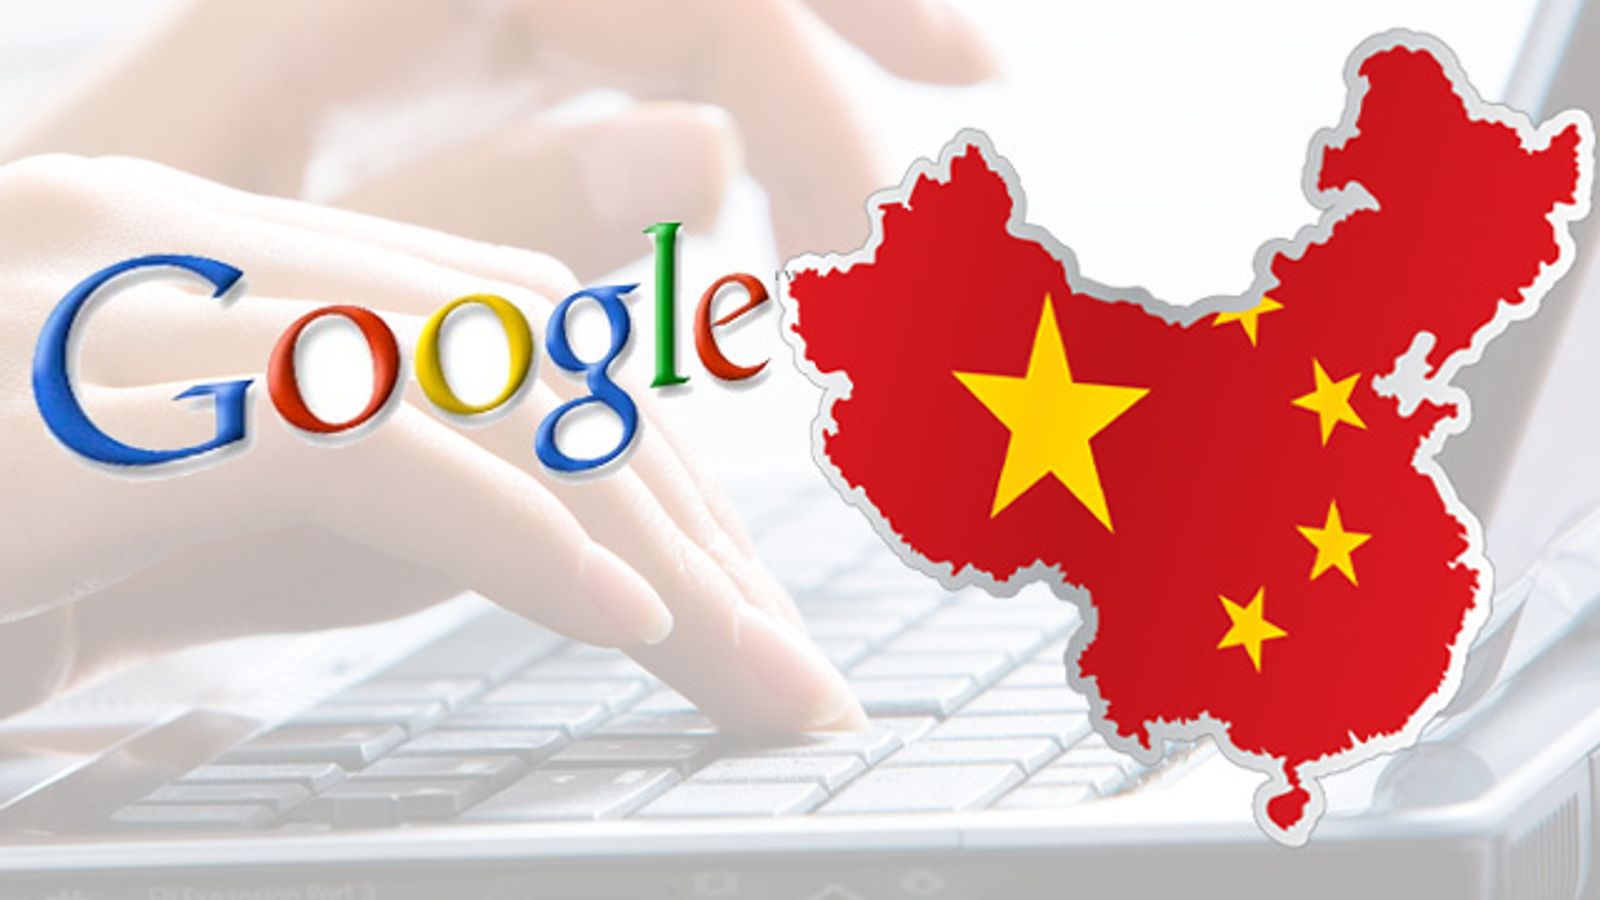 China and Google Face Off Over Censorship, Cyber Attacks